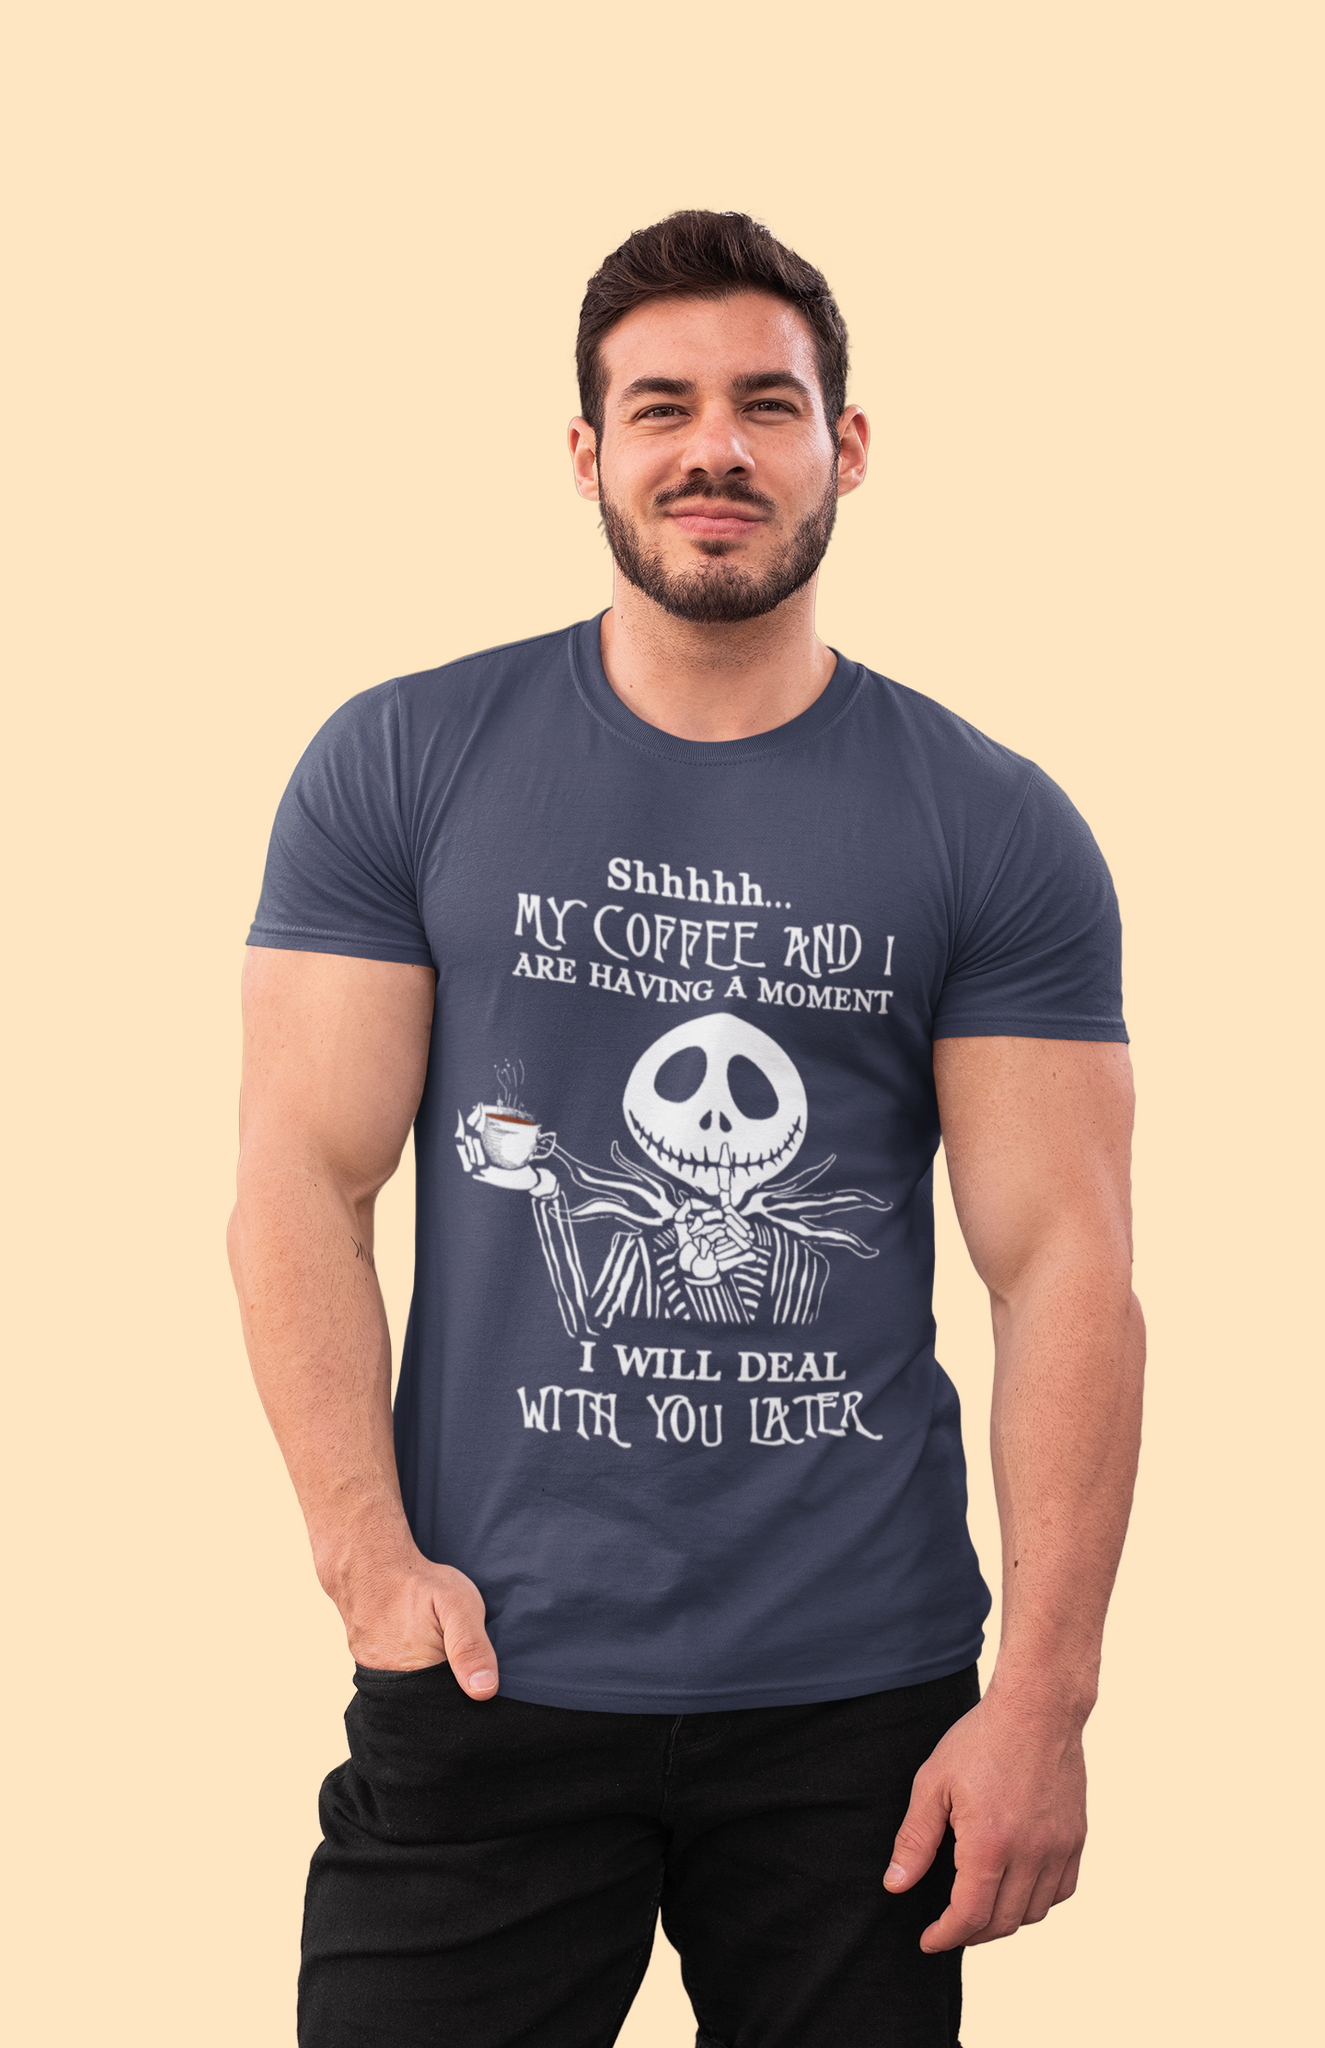 Nightmare Before Christmas T Shirt, Shhhhh My Coffee And I Are Having A Moment Tshirt, Jack Skellington T Shirt, Halloween Gifts